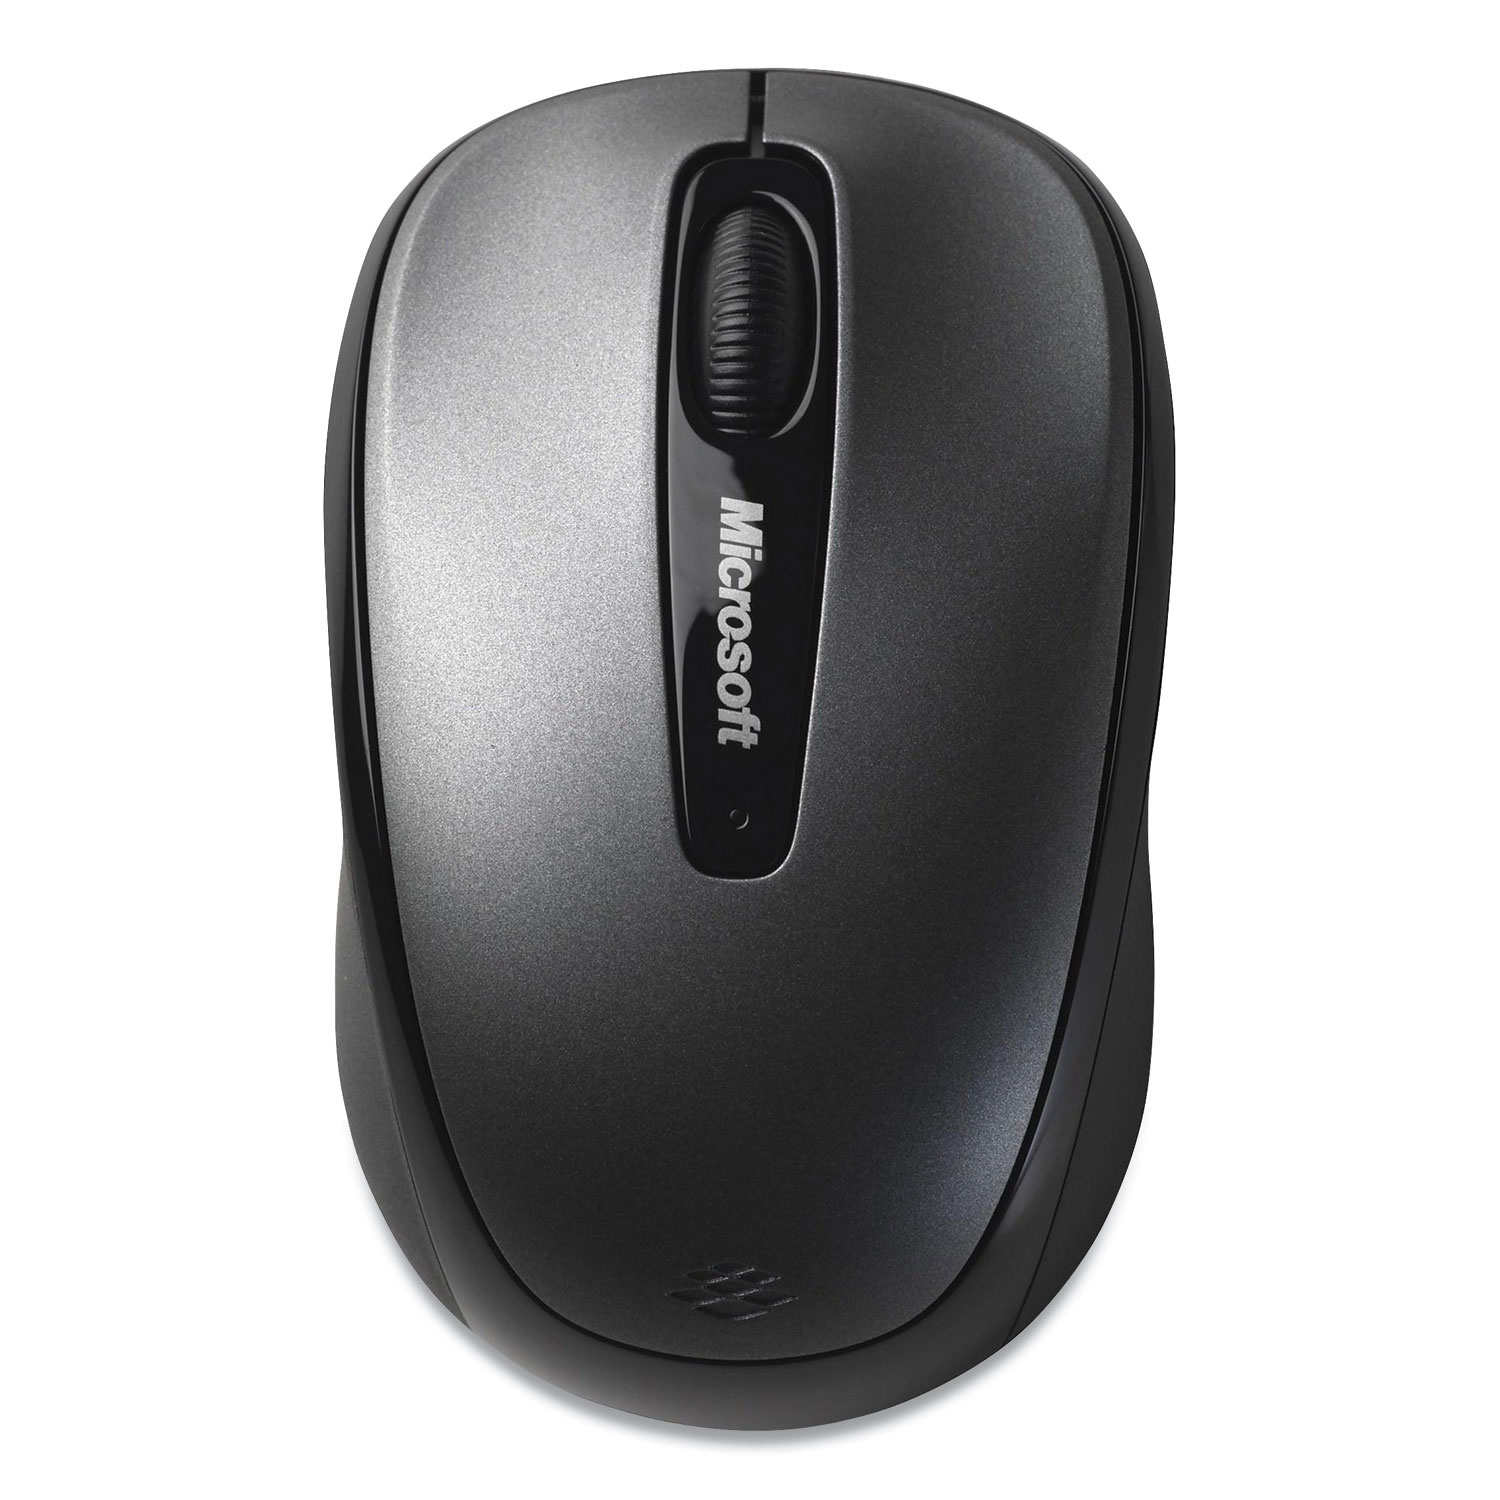  Microsoft GMF-00010 Mobile 3500 Wireless Optical Mouse, 2.4 GHz Frequency/16.4 ft Wireless Range, Left/Right Hand Use, Loch Ness Gray (MSF865915) 